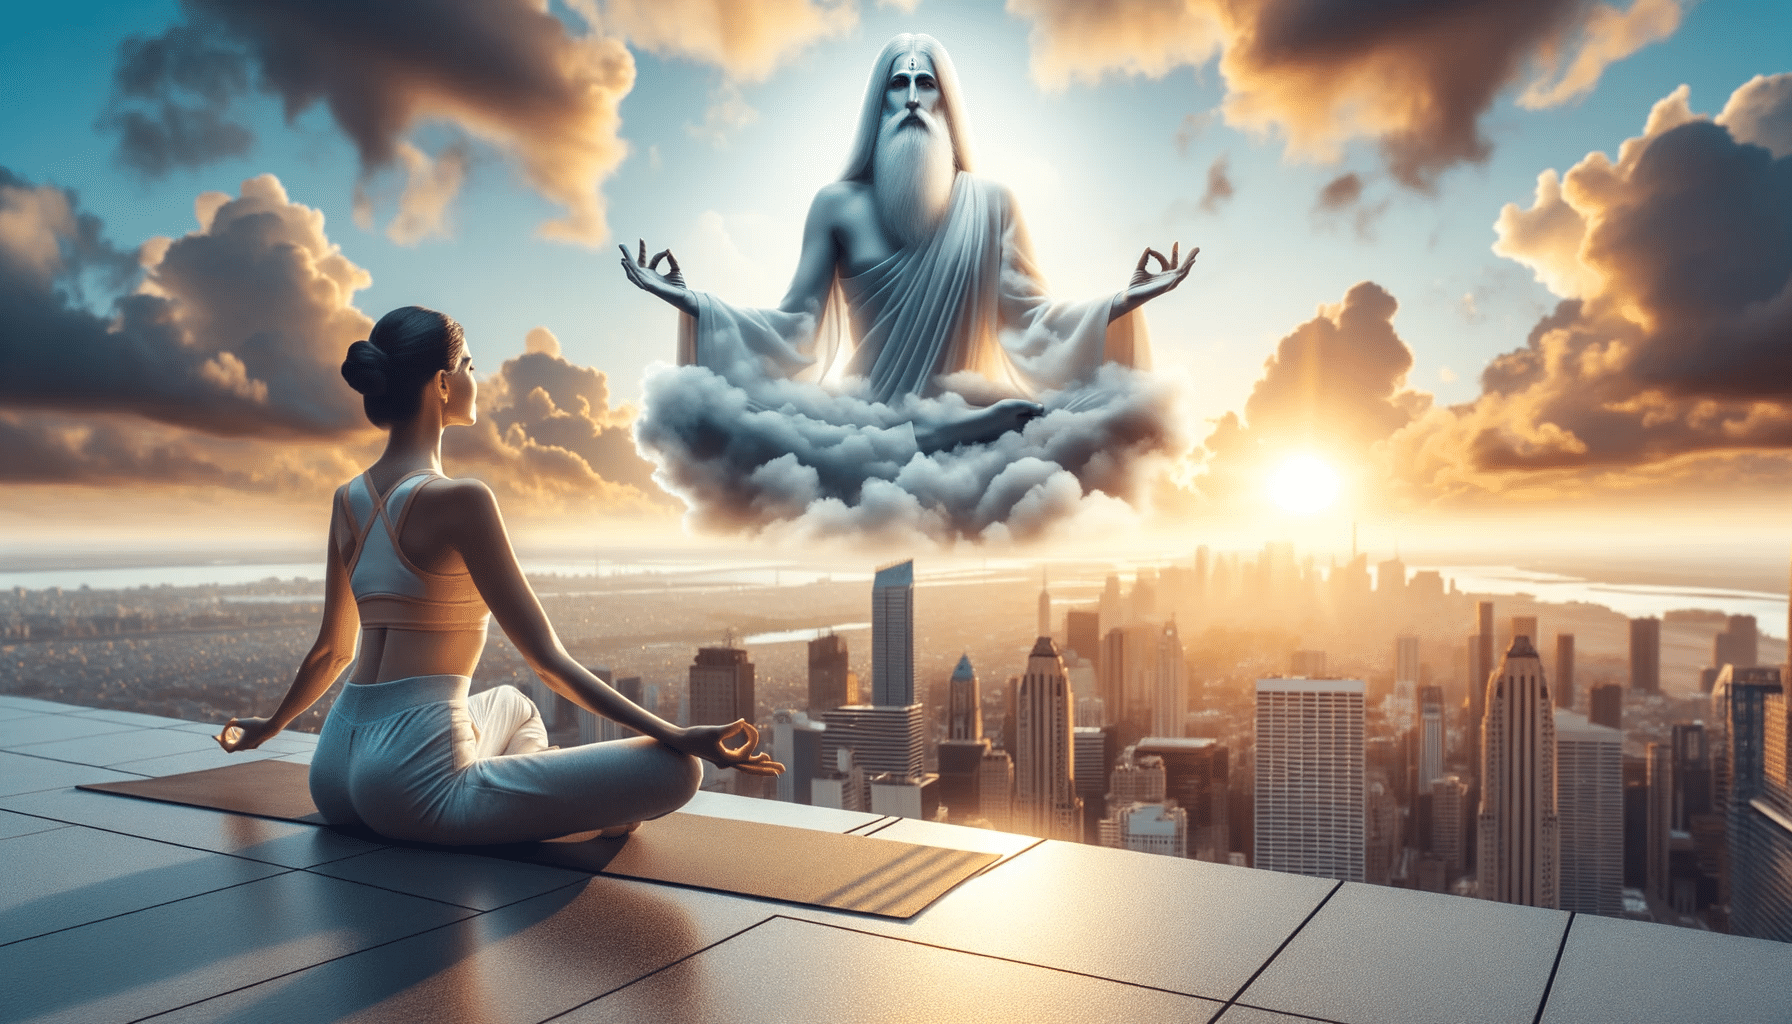 A woman is meditating in front of a city skyline.